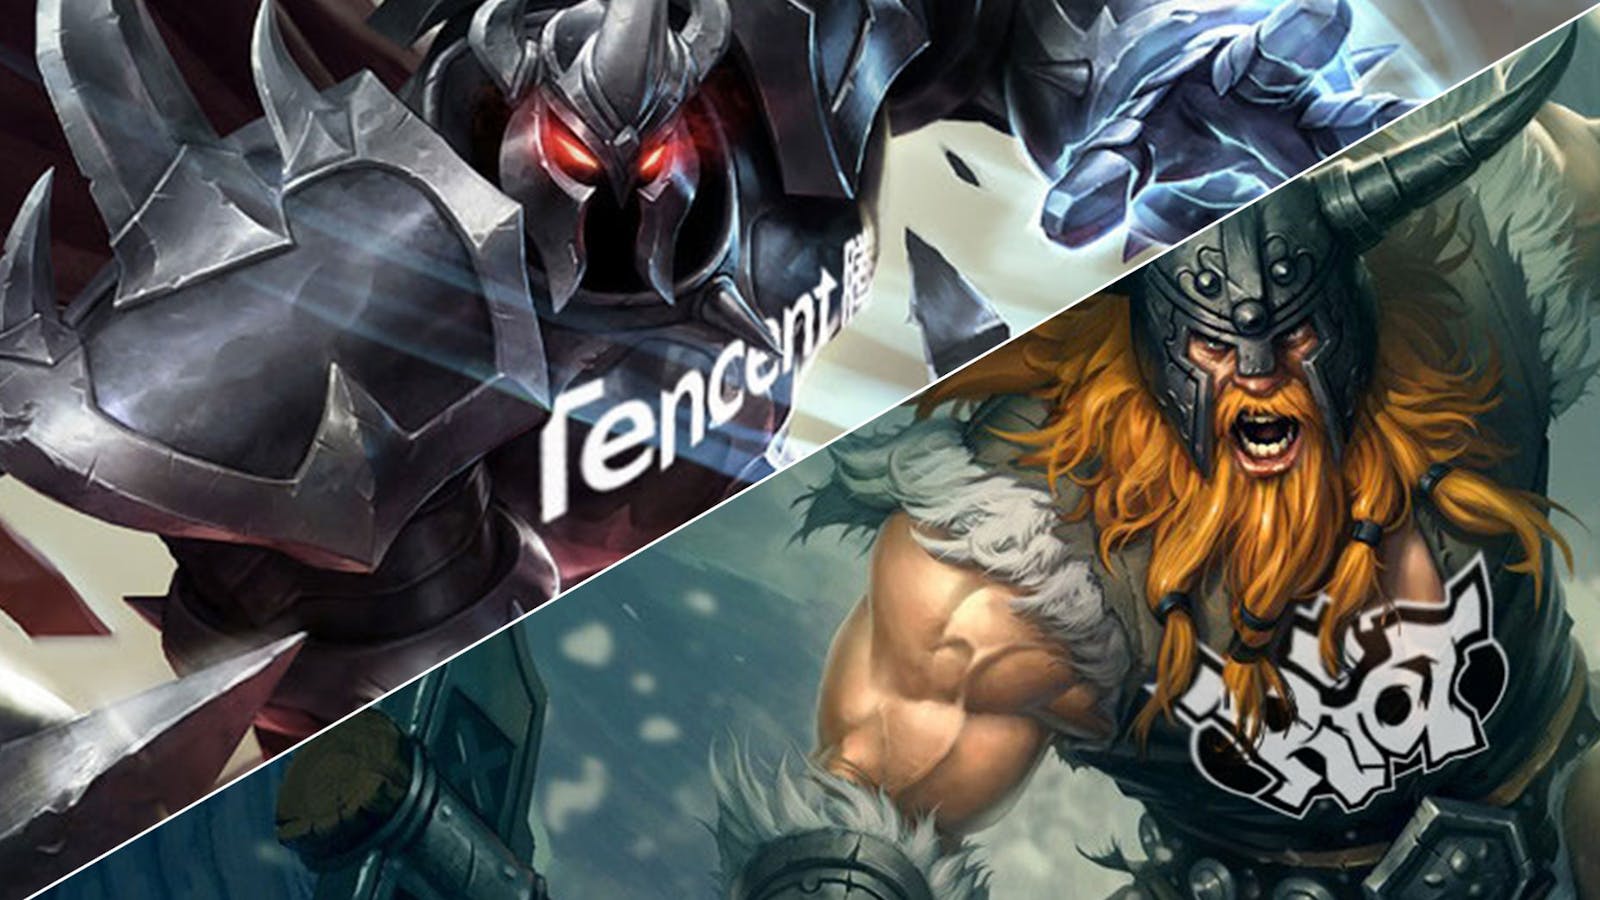 Tencent Games is following Riot Games' path with Honor of Kings 